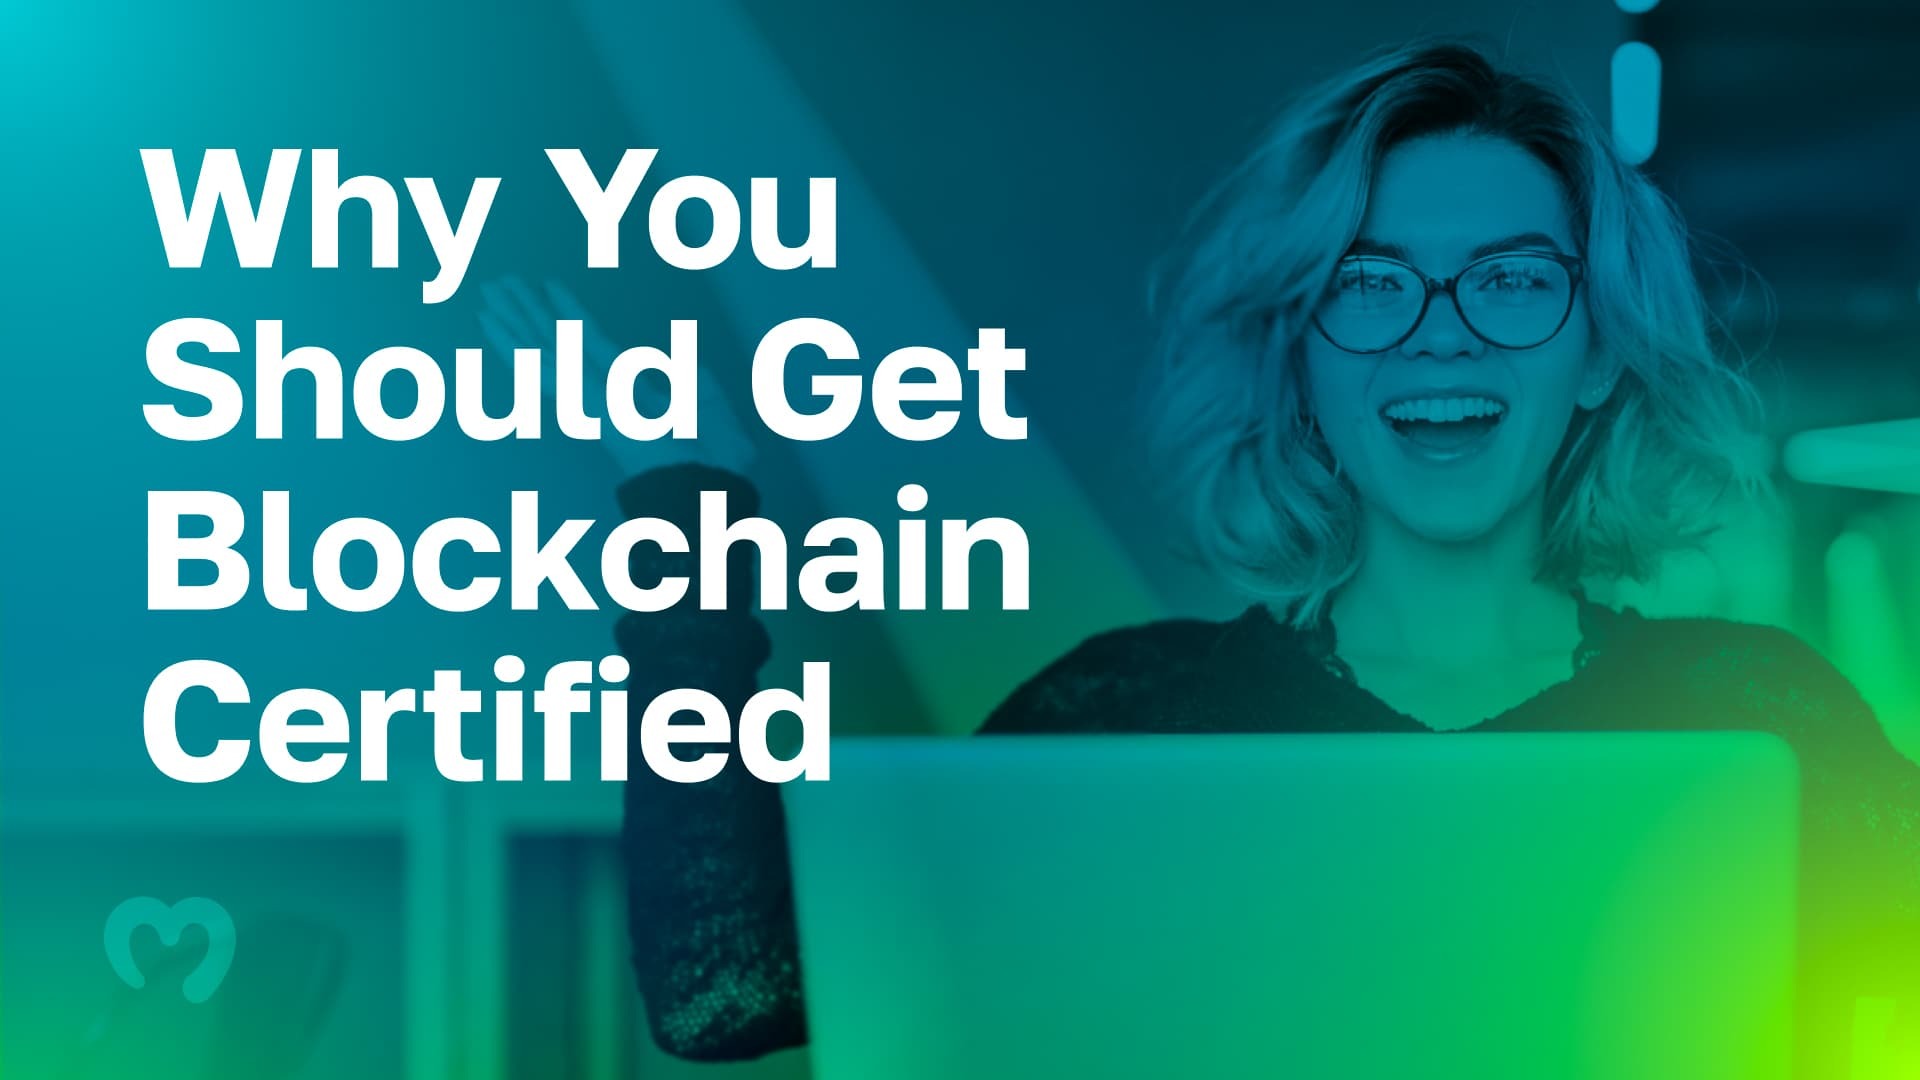 22_11_Why-You-Should-Get-Blockchain-Certified (1)